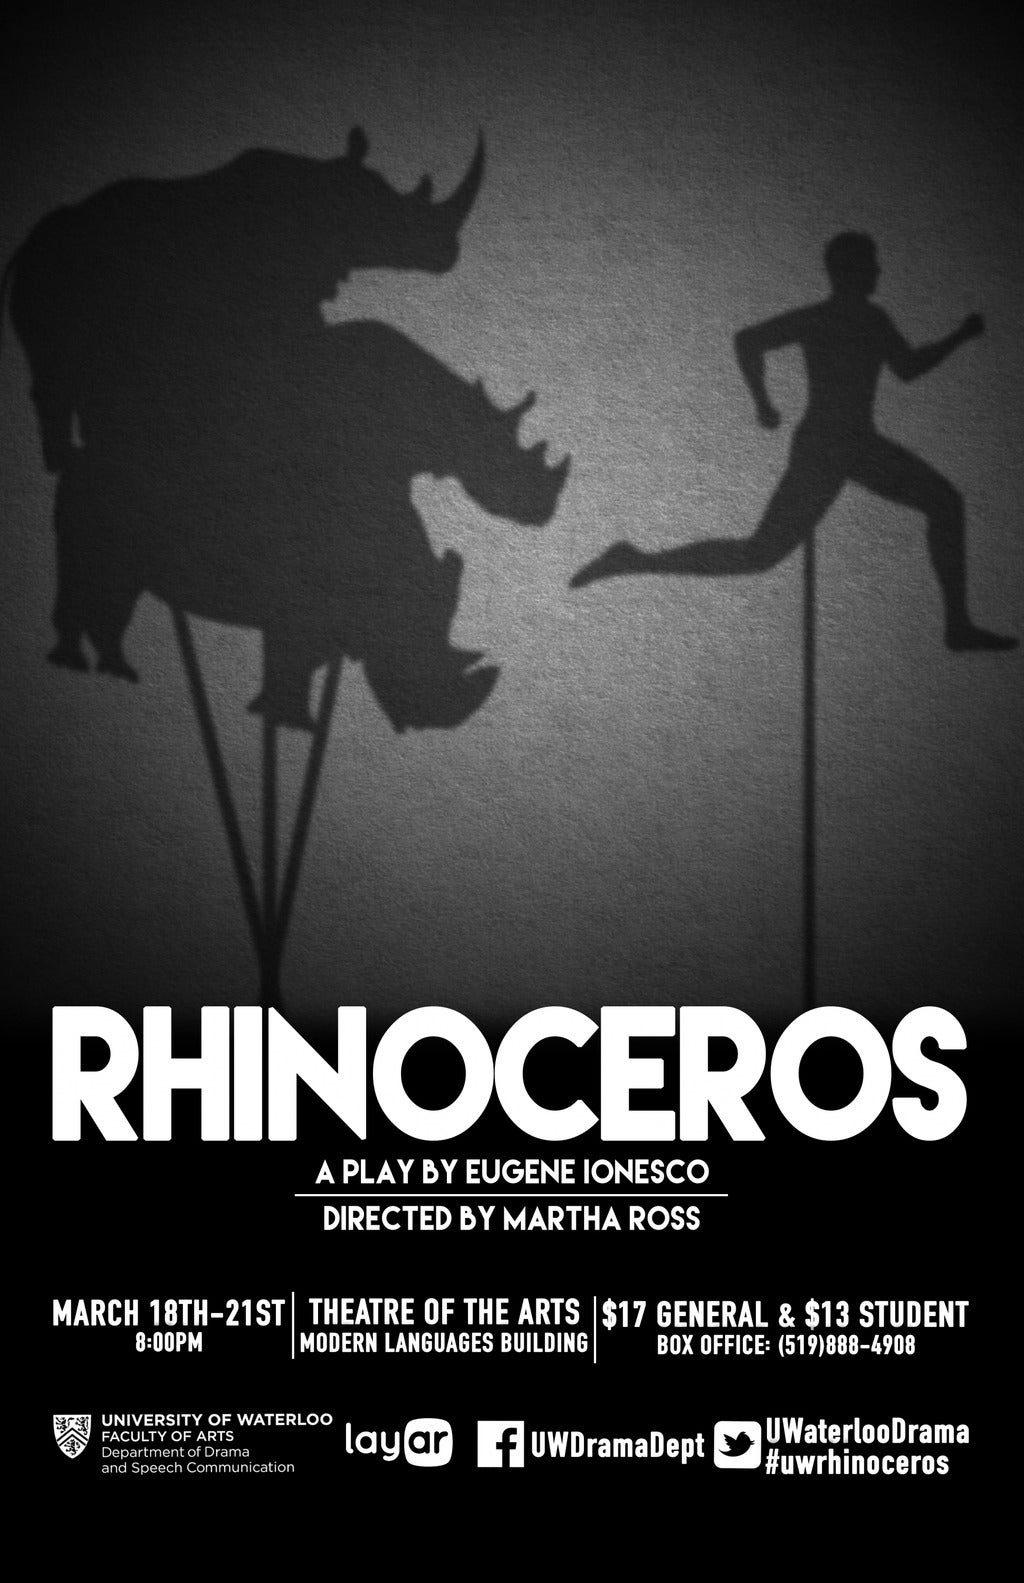 black and white poster of shadow puppet rhinoceroses chasing a man